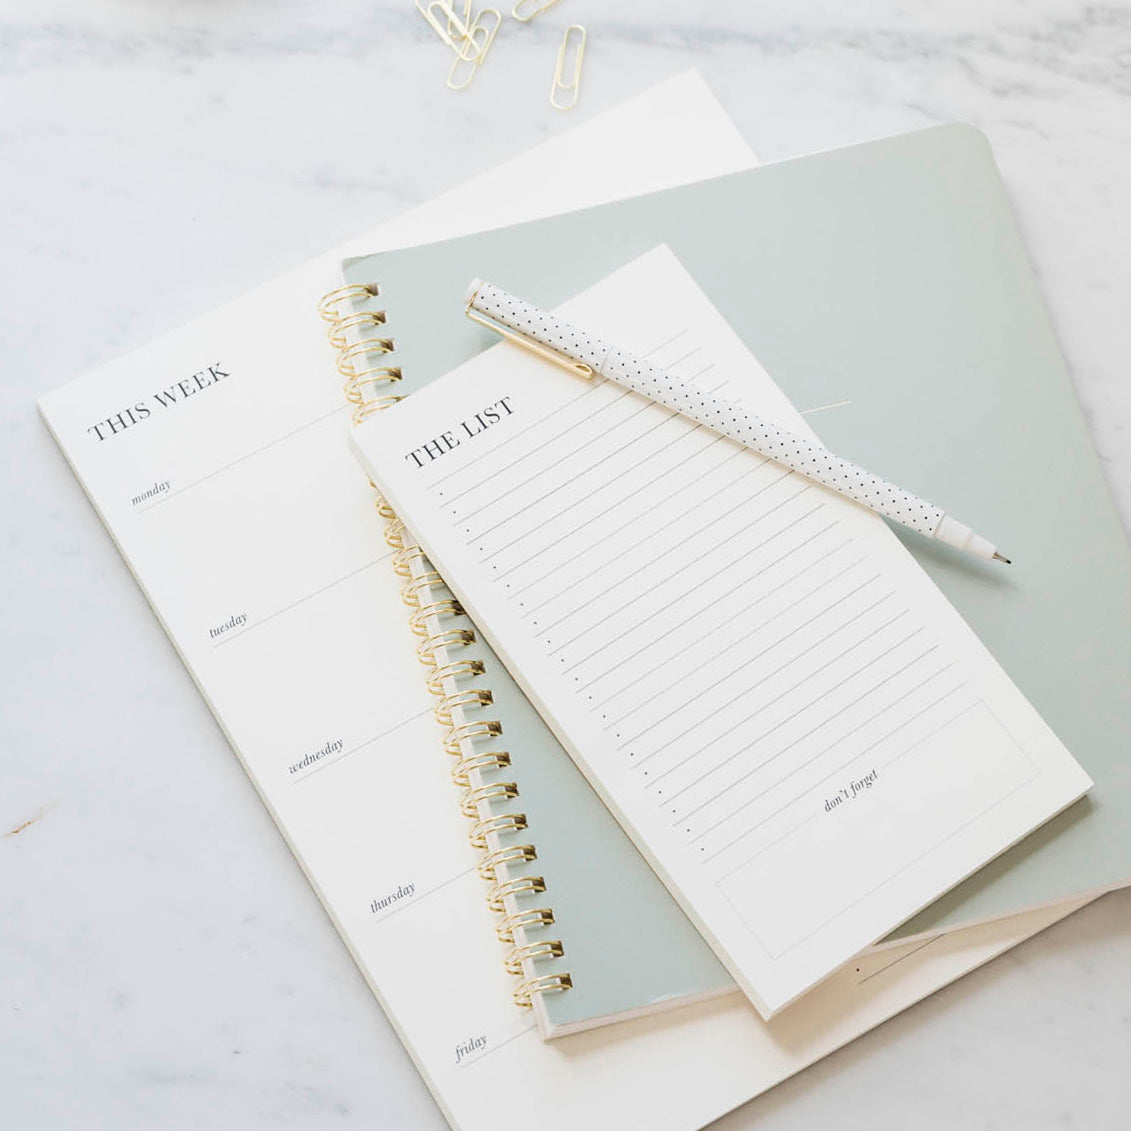 Black and cream list pads with office green notebook